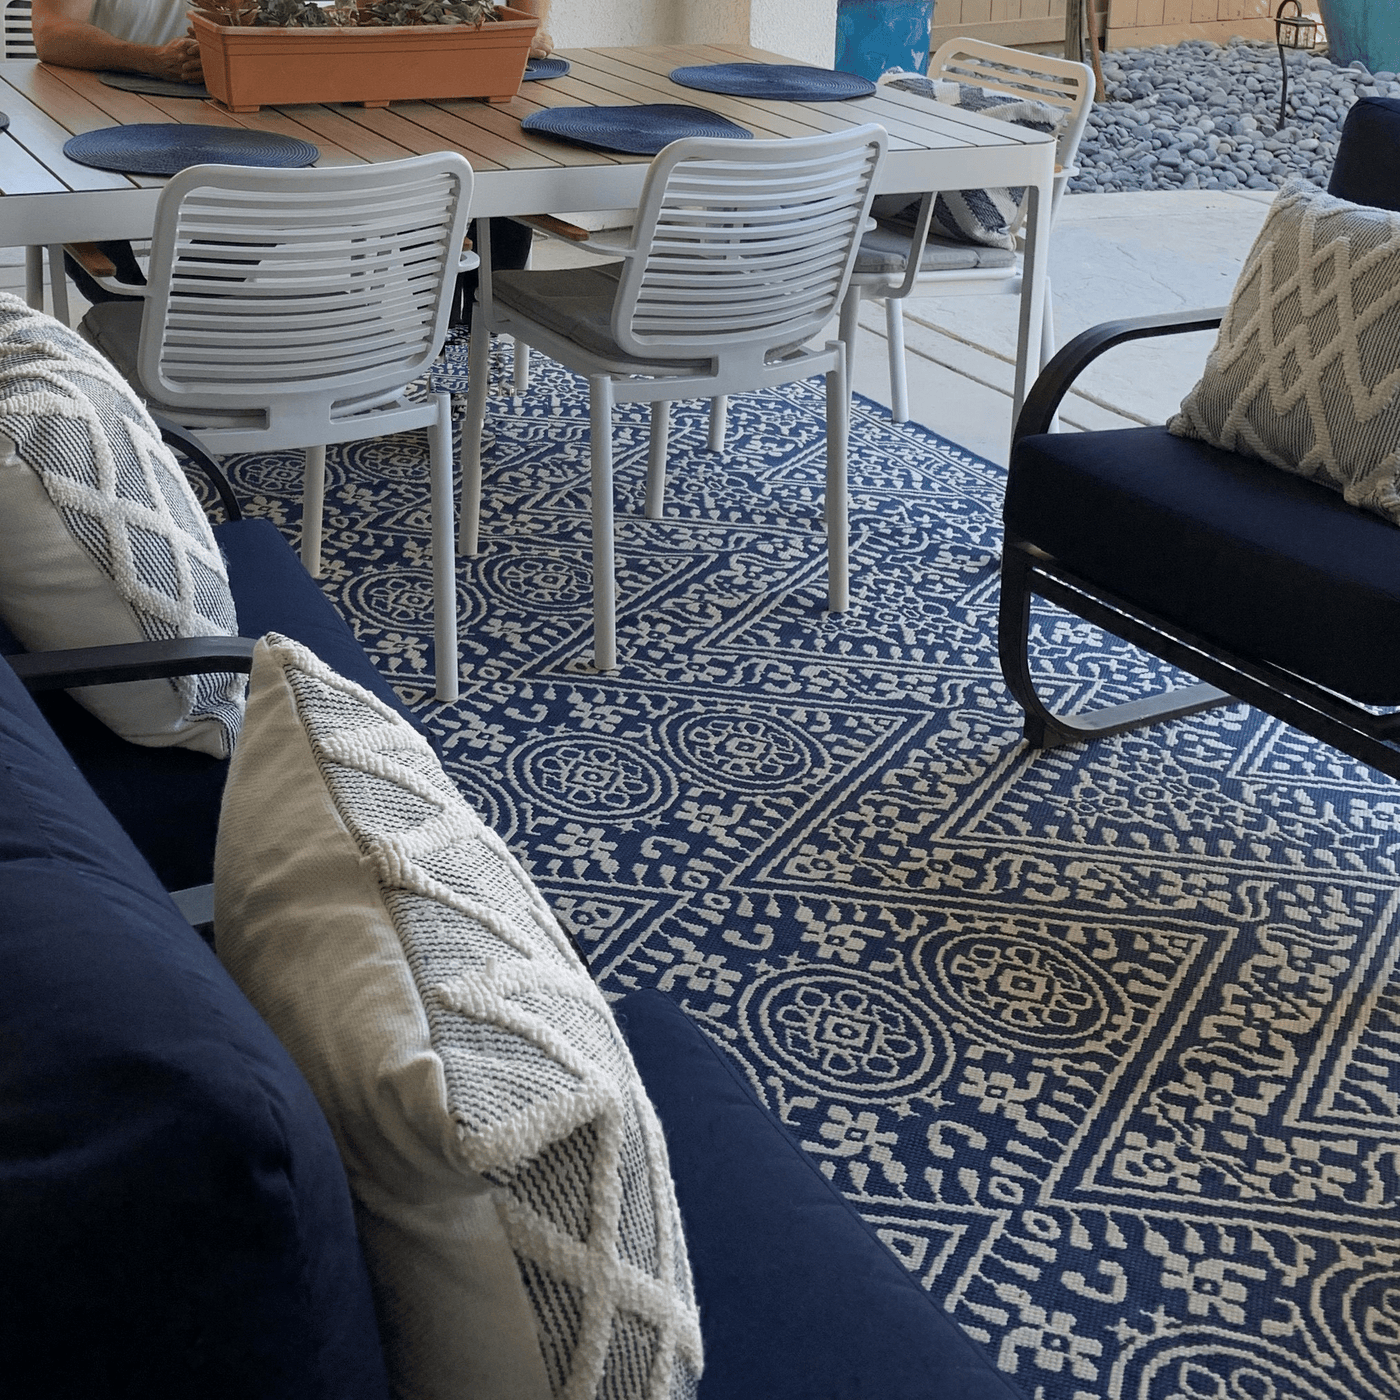 Rugs - Outdoor Space Designs